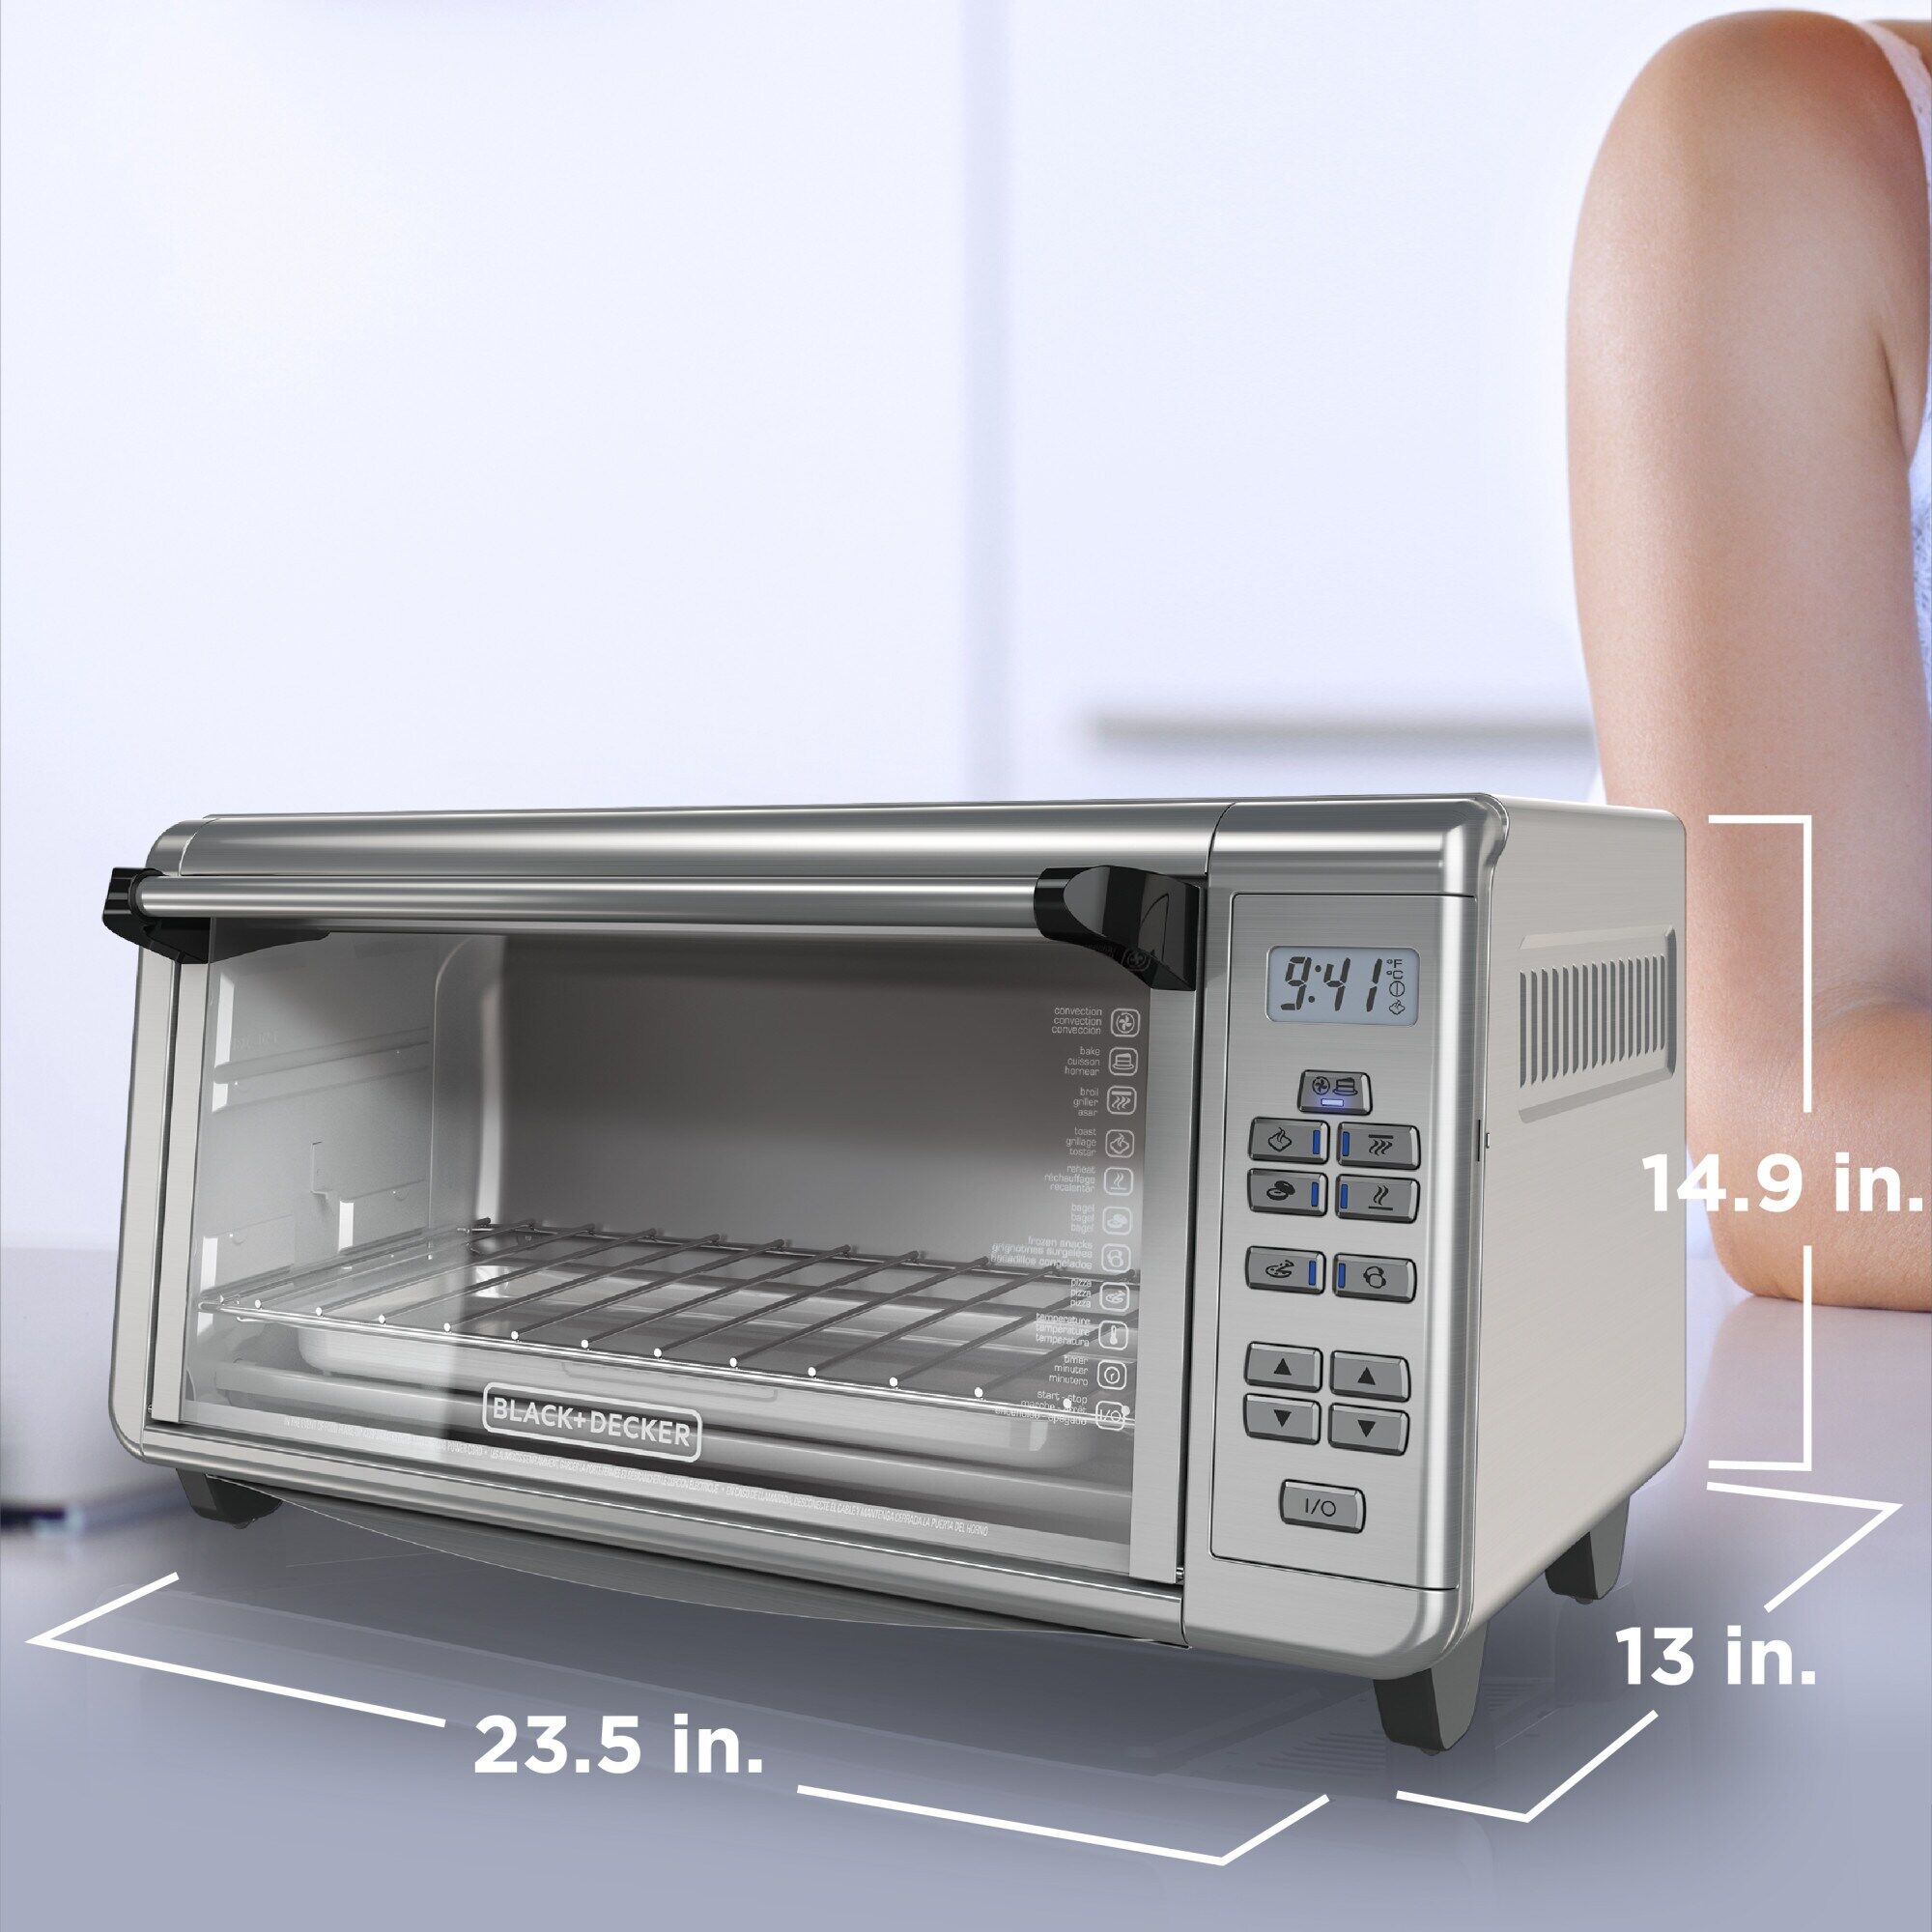 Image of BLACK+DECKER toaster oven on a kitchen counter near a man's arm. Drawn onto the image are the measurements of the unit.